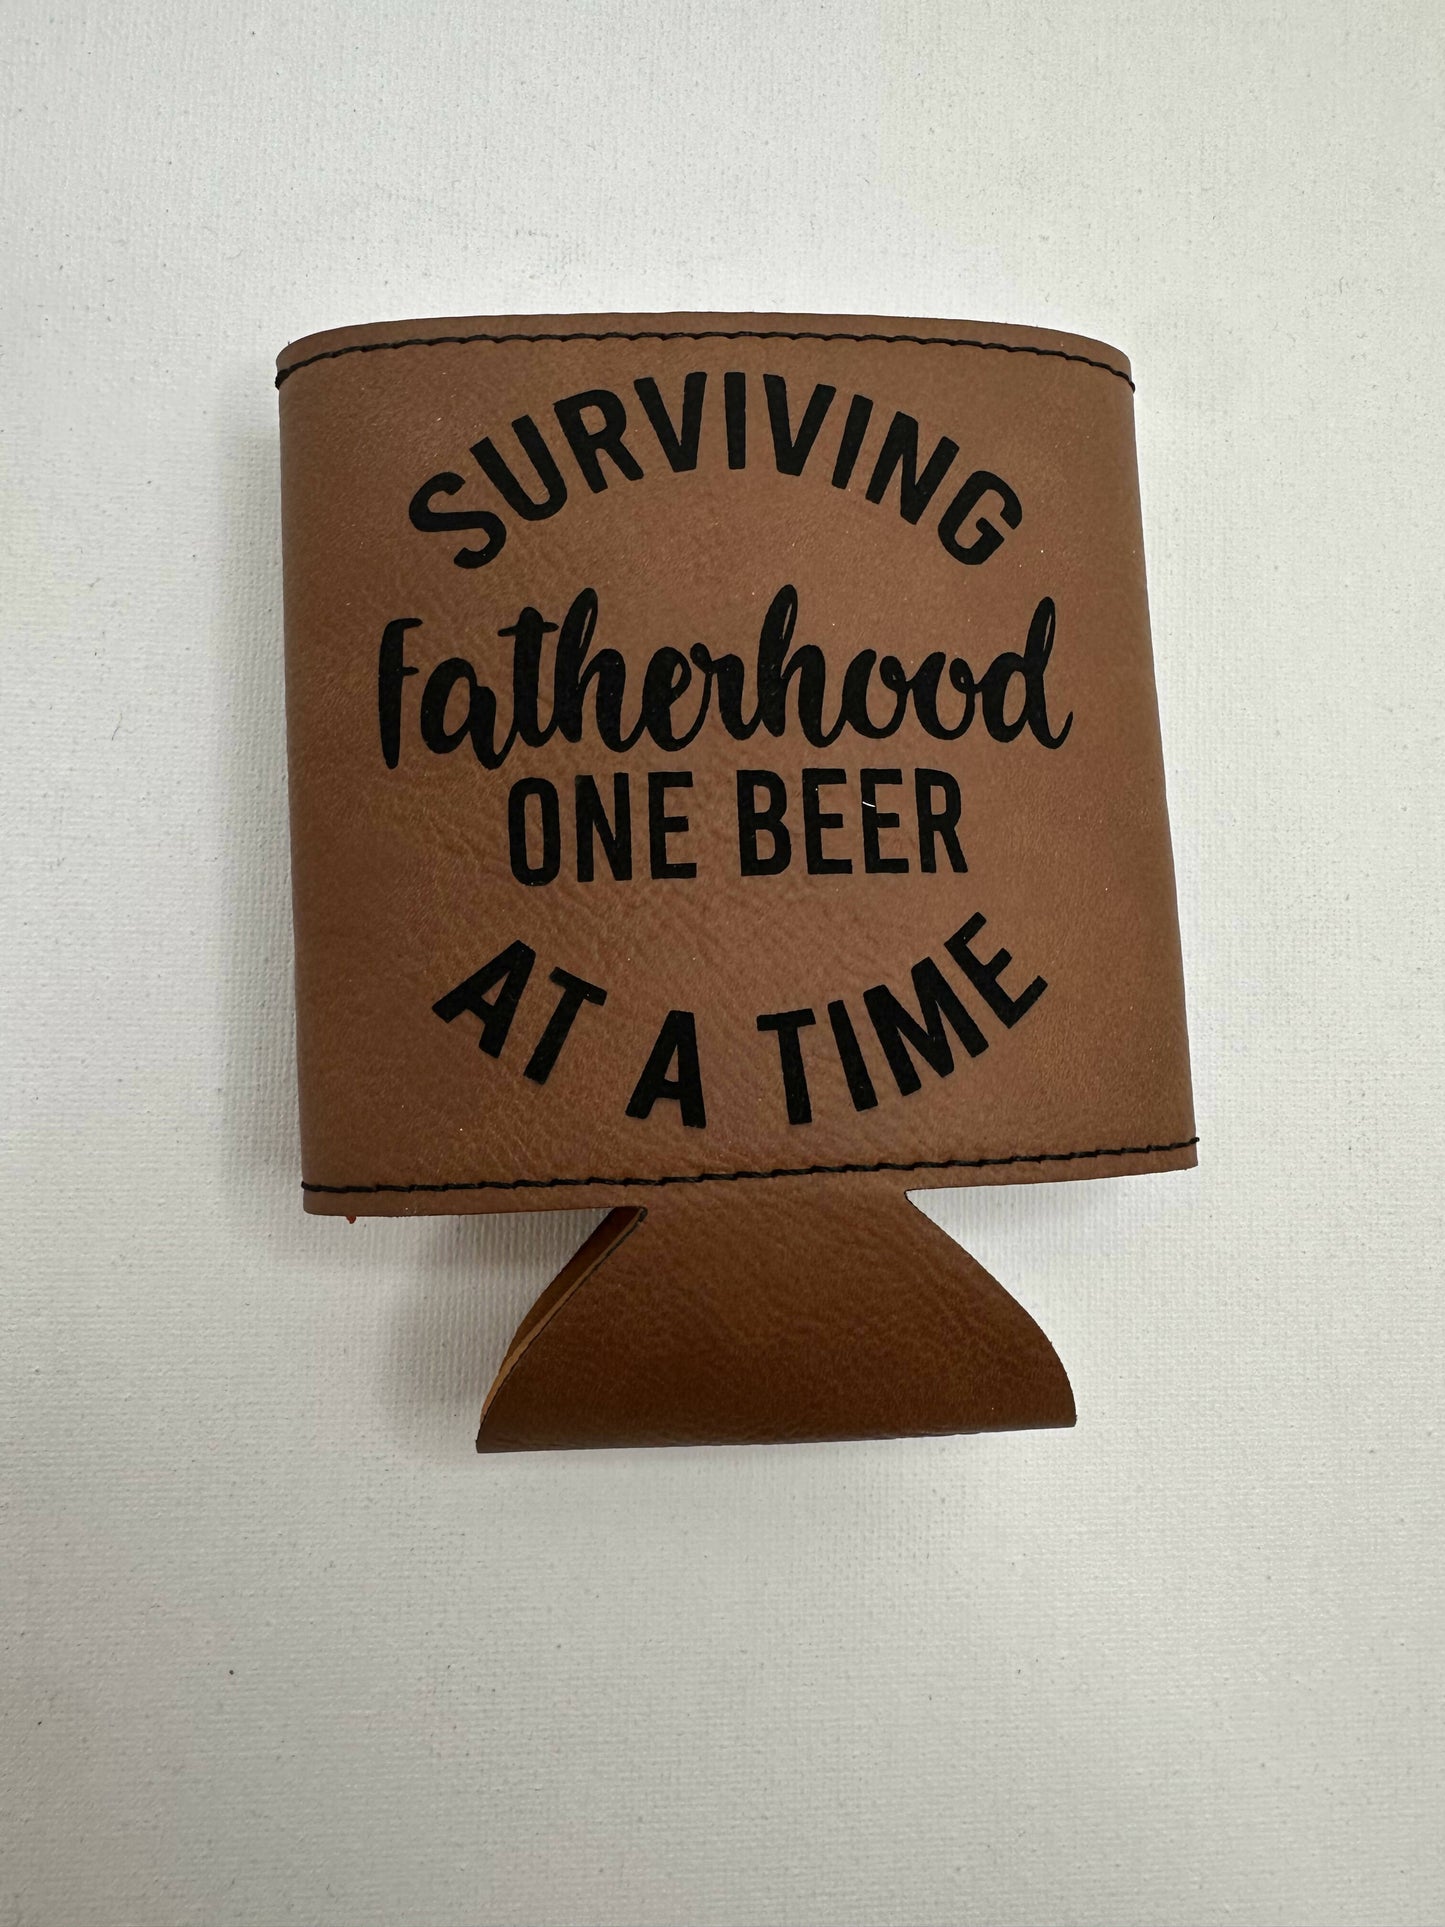 Surviving fatherhood one beer at a time koozie